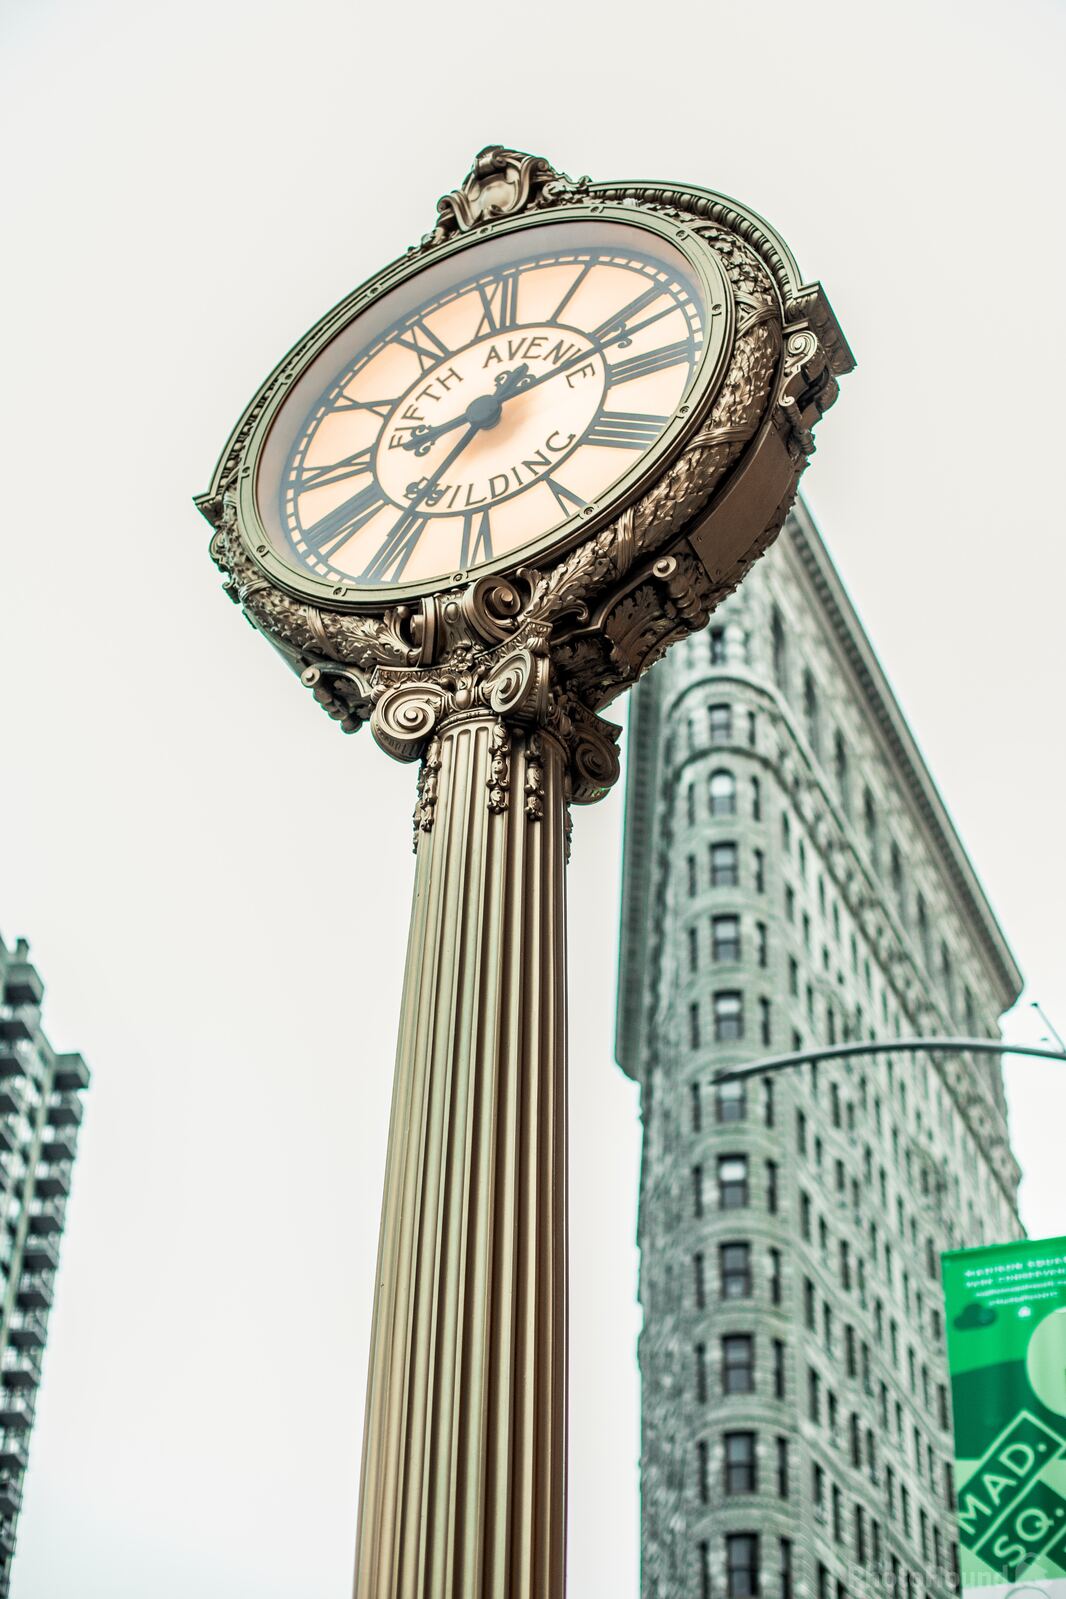 Image of Fifth Avenue Clock by Team PhotoHound